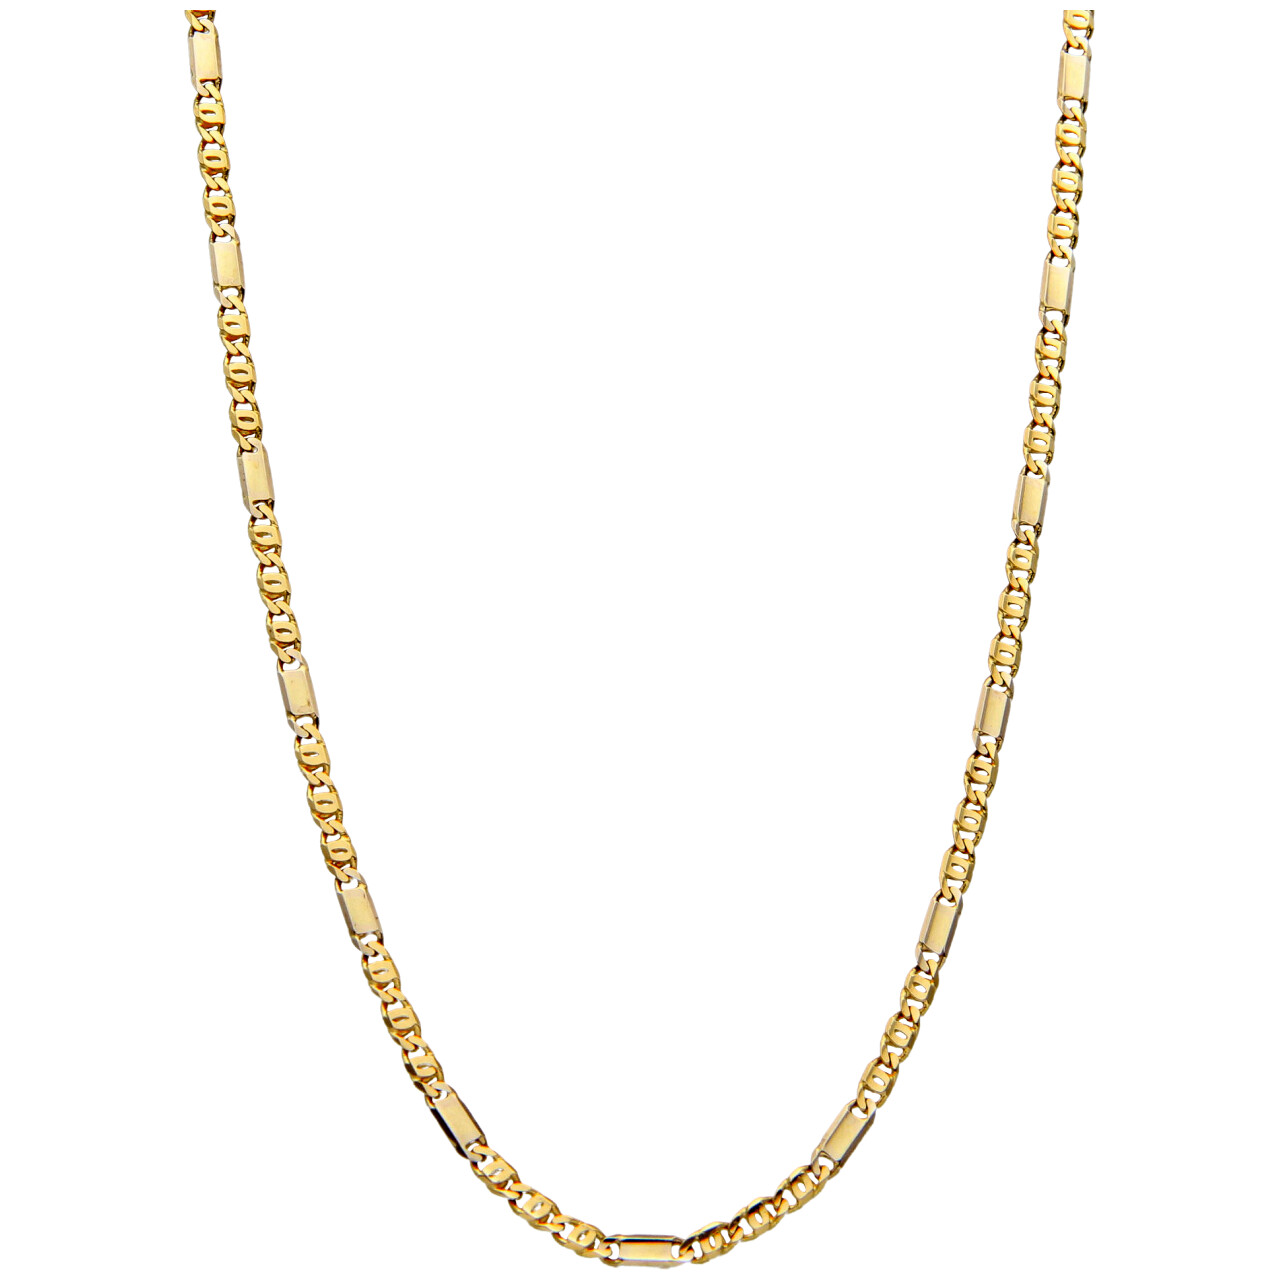 Modern yellow gold necklace